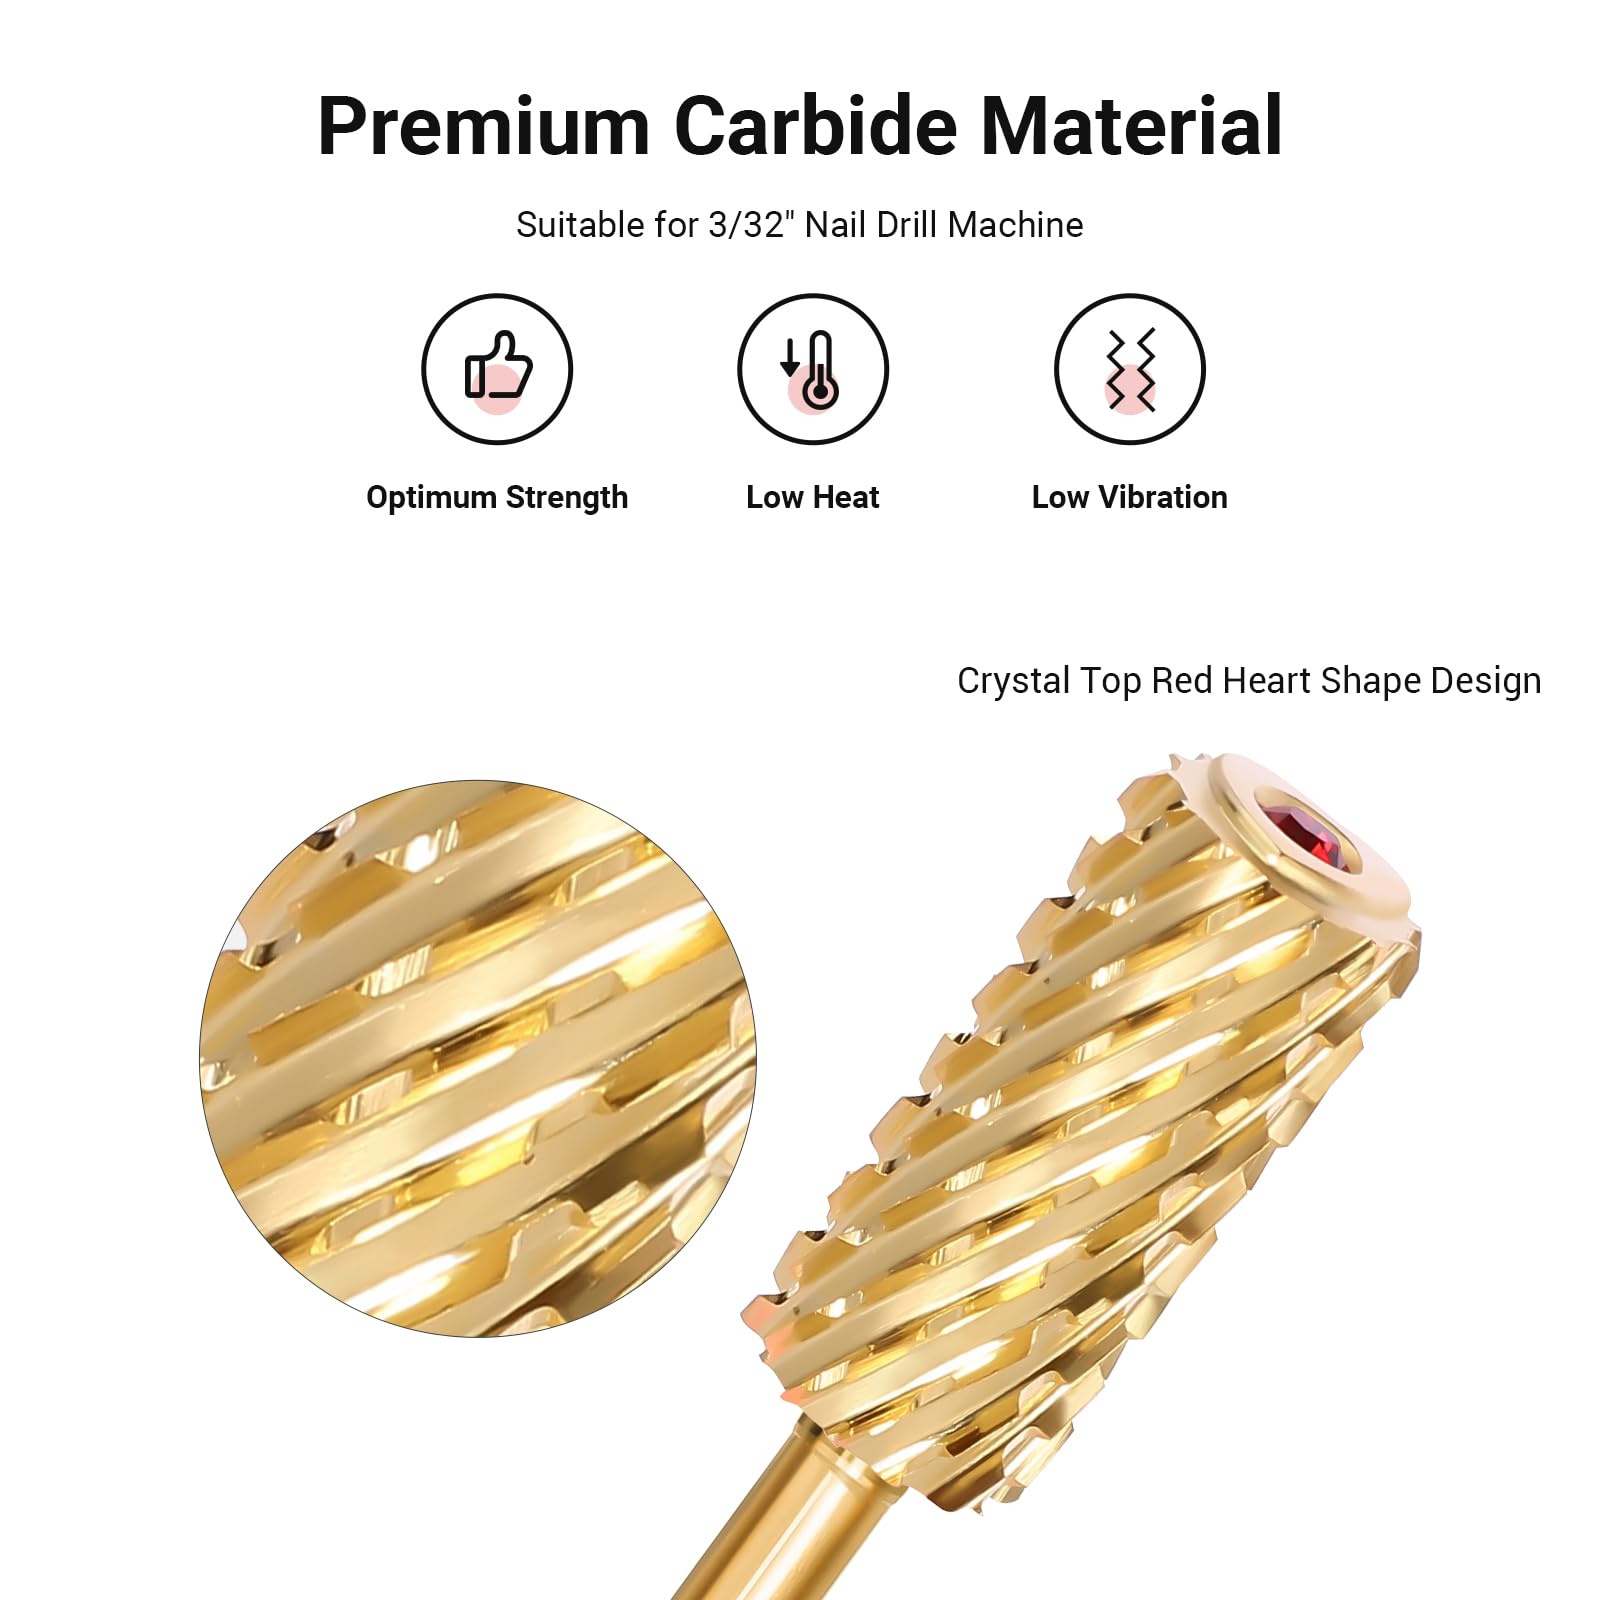 Crystal Top Red Heart Shape Large Barrel Carbide Nail Drill Bit (Gold)